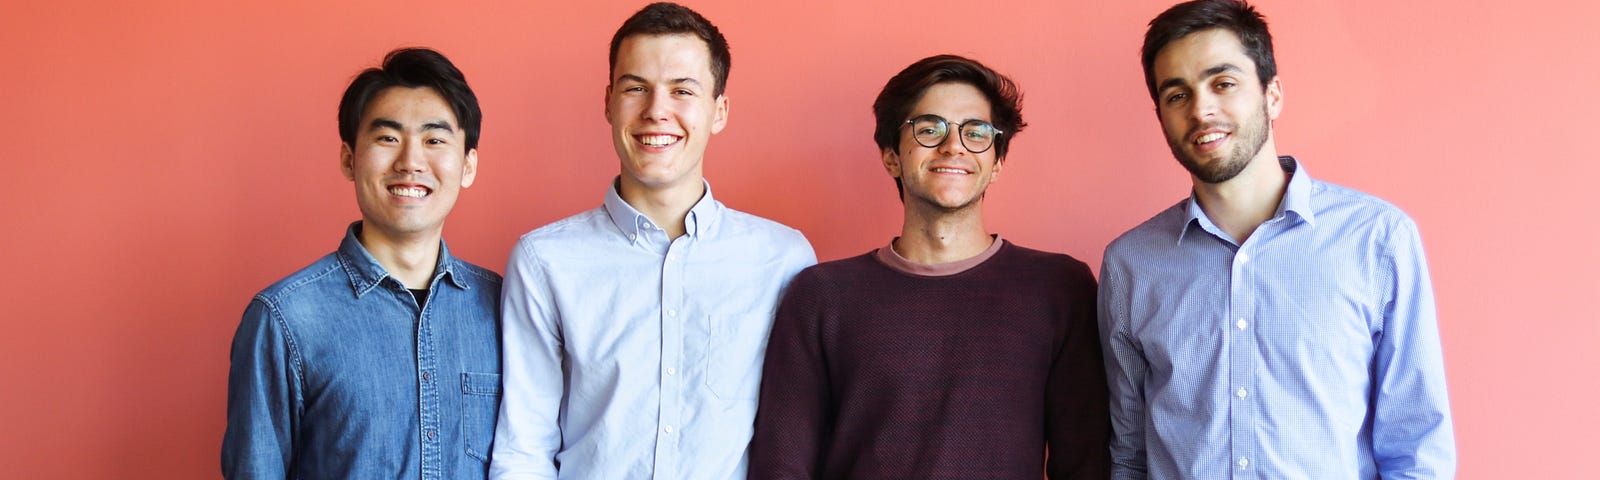 Four business casual dressed young men pose for a group photo in front of a pink wall.